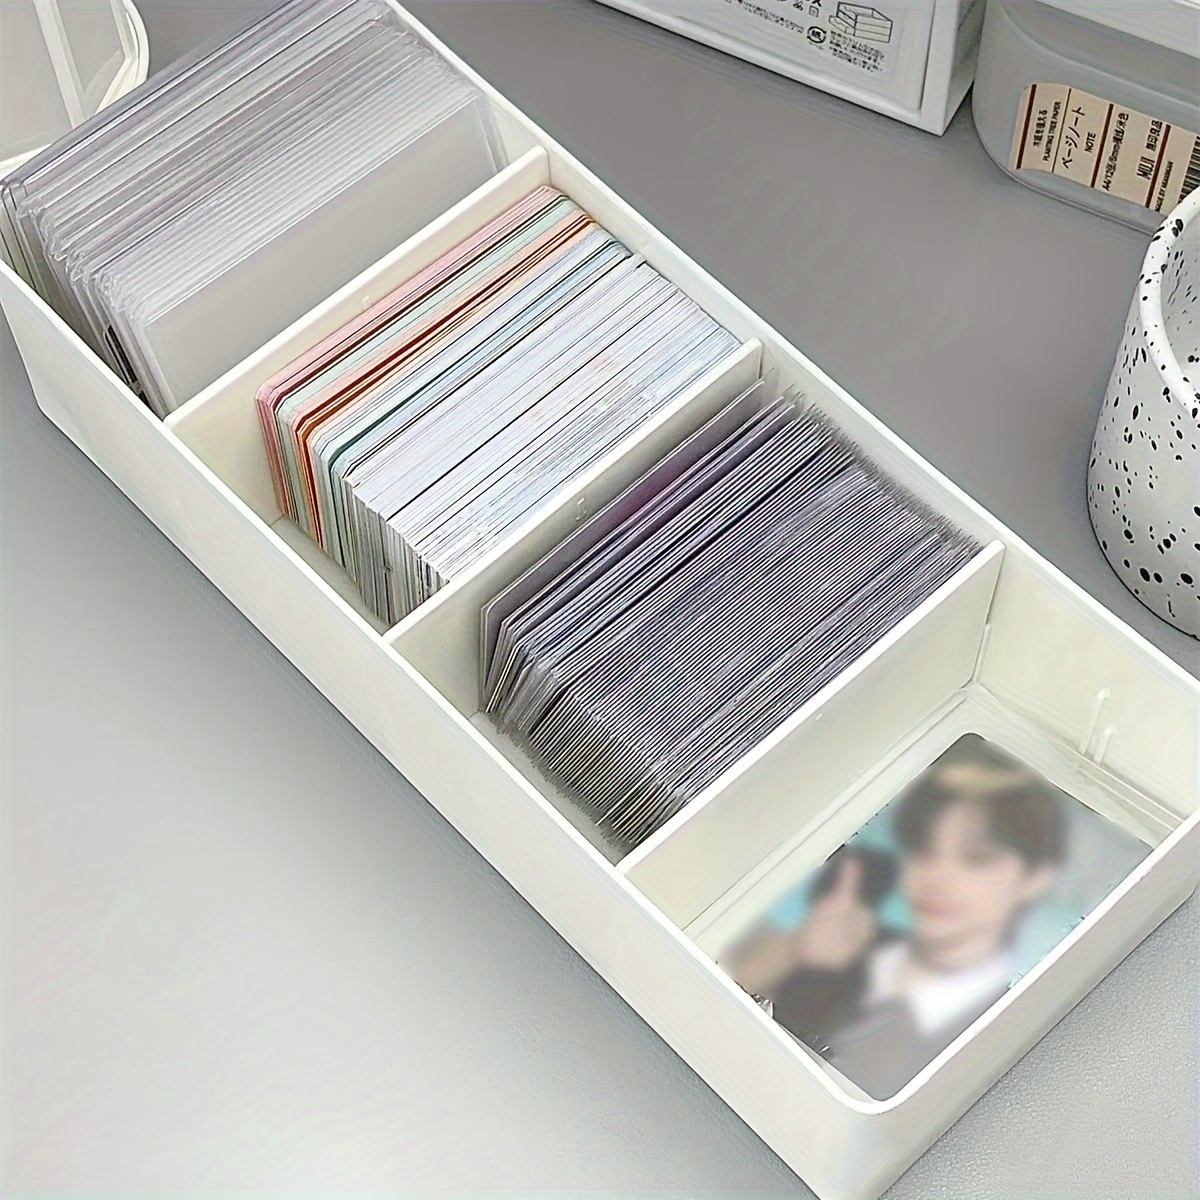 Greeting Card Storage & Organizer Box With 6 Adjustable Dividers